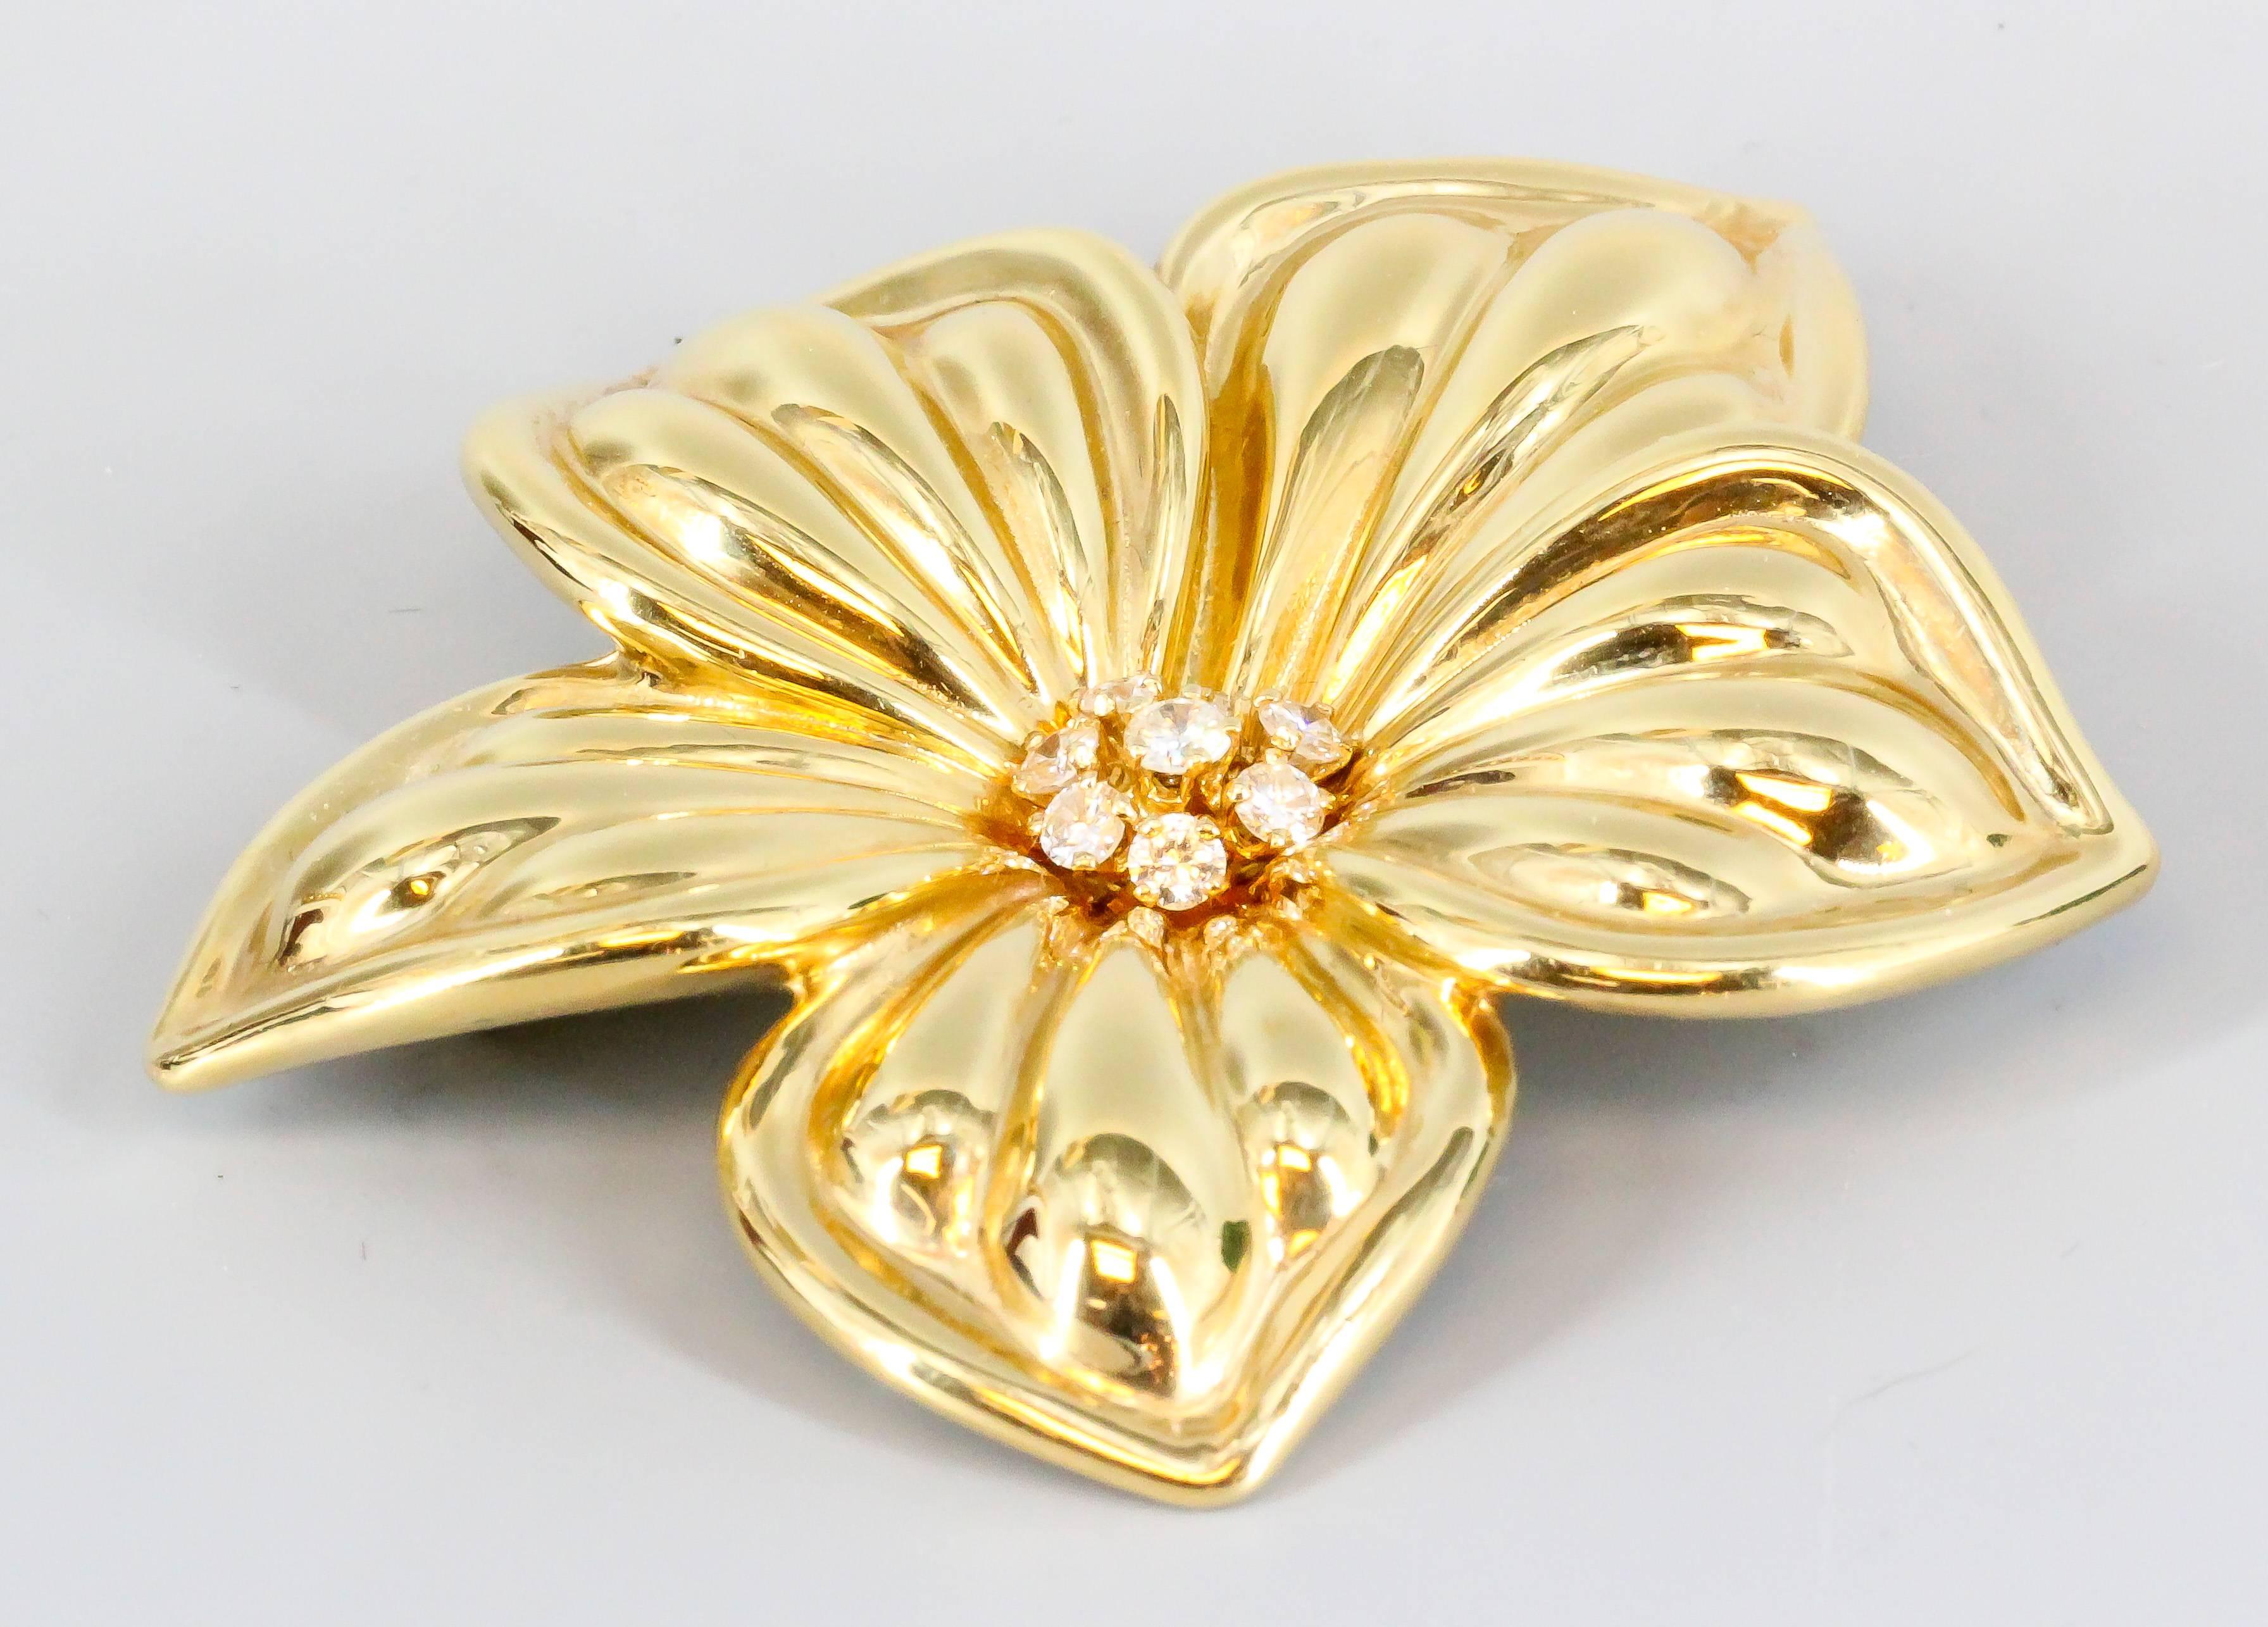 Elegant diamond and 18K yellow gold brooch by Van Cleef & Arpels. It resembles a flower, with high grade round brilliant cut diamonds in the middle over a stunning 18K yellow gold setting. Beautiful workmanship and easy to wear.

Hallmarks: V.C.A.,